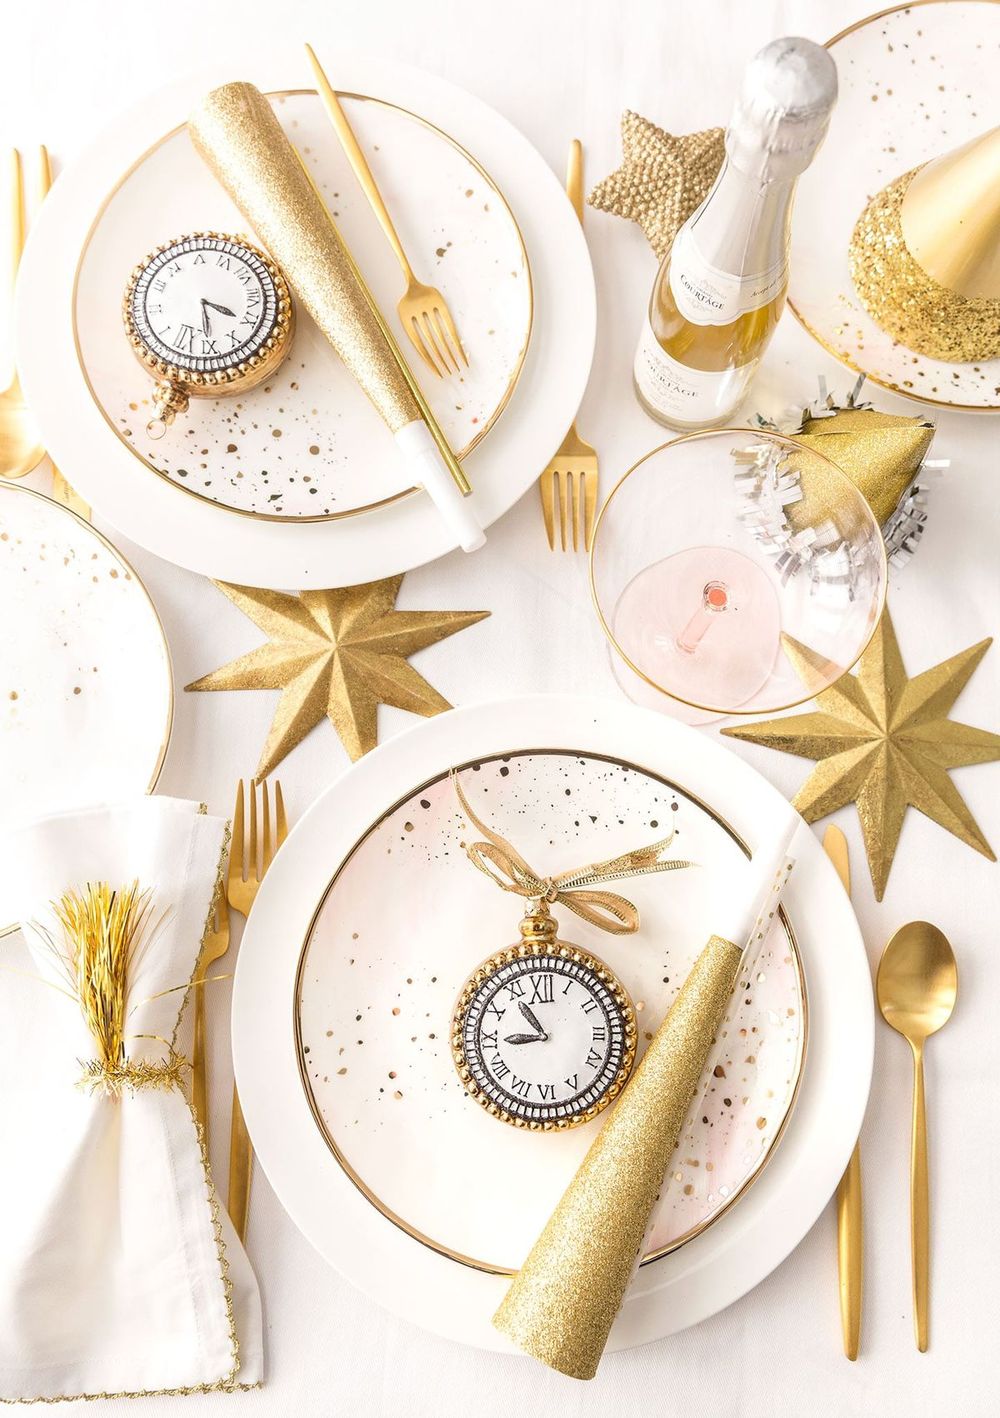 new-years-eve-gold-table-decor-with-countdown-clock-via-pizzazzerie.jpg